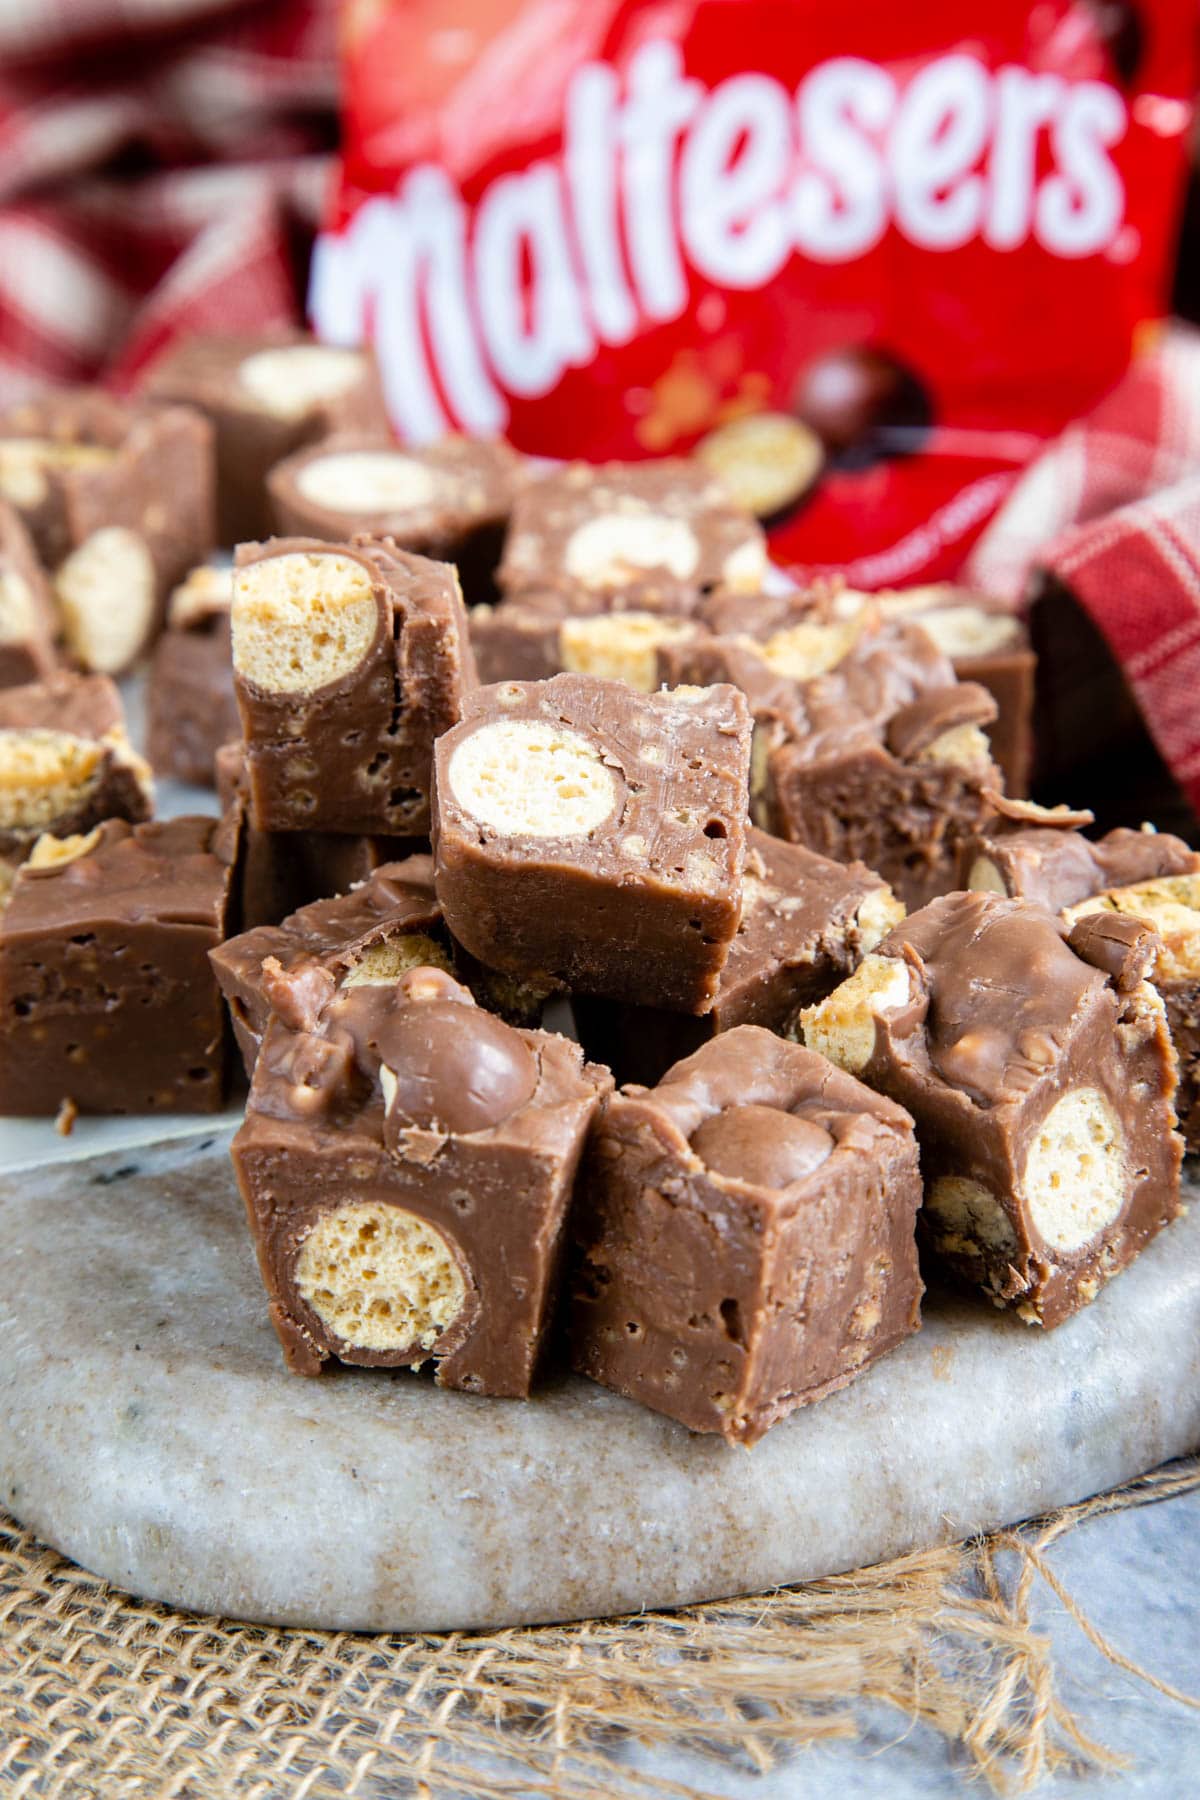 Cubes of Malteser fudge on a marble board, showing the whole maltesers stirred through the fudge. A red Malteser bag is in the background.